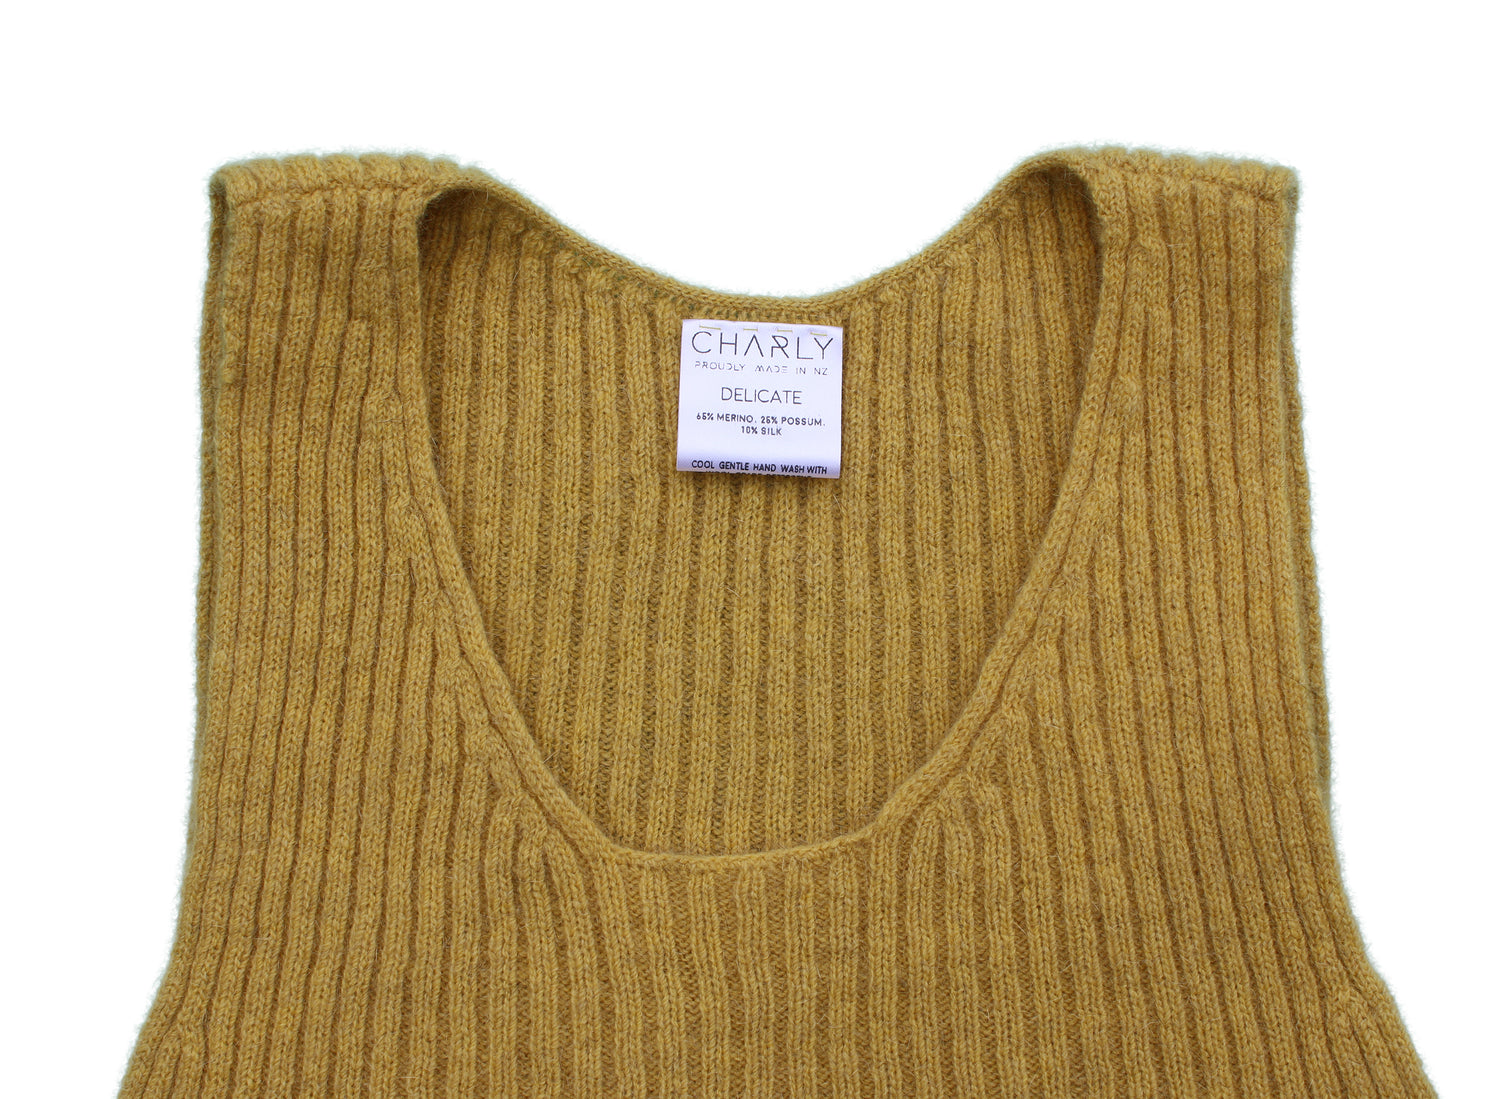 detail of knitted scoop neckline on tank top